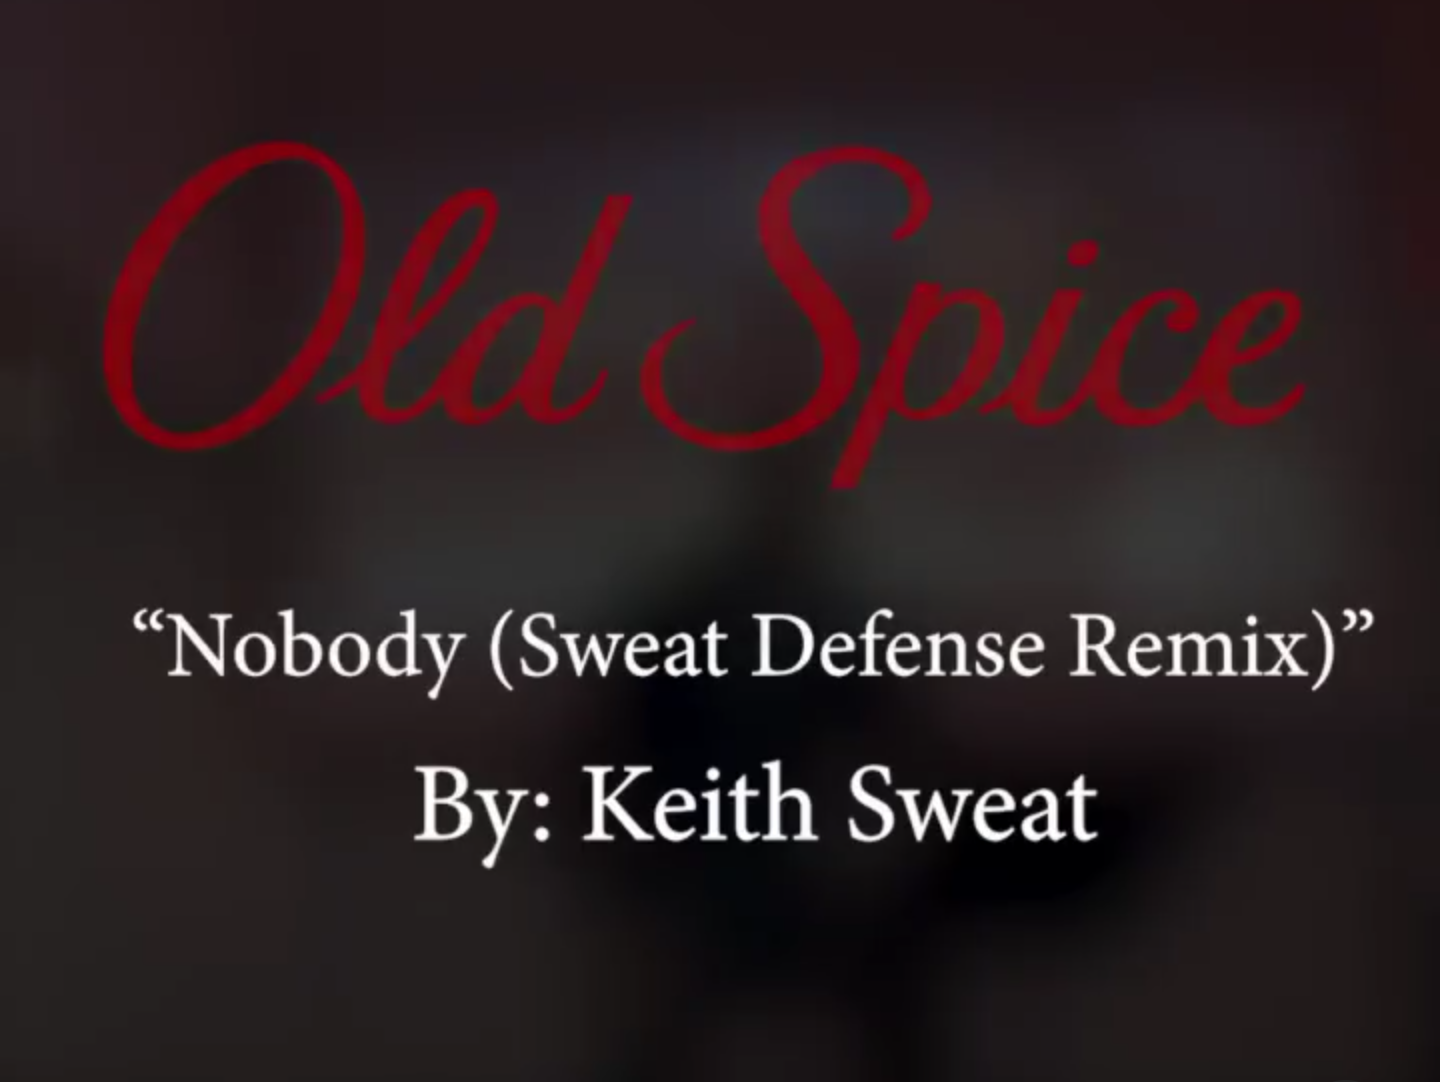 Keith Sweat Creates Hilarious "Sweat Defense" Remix to his hit "Nobody" for Old Spice